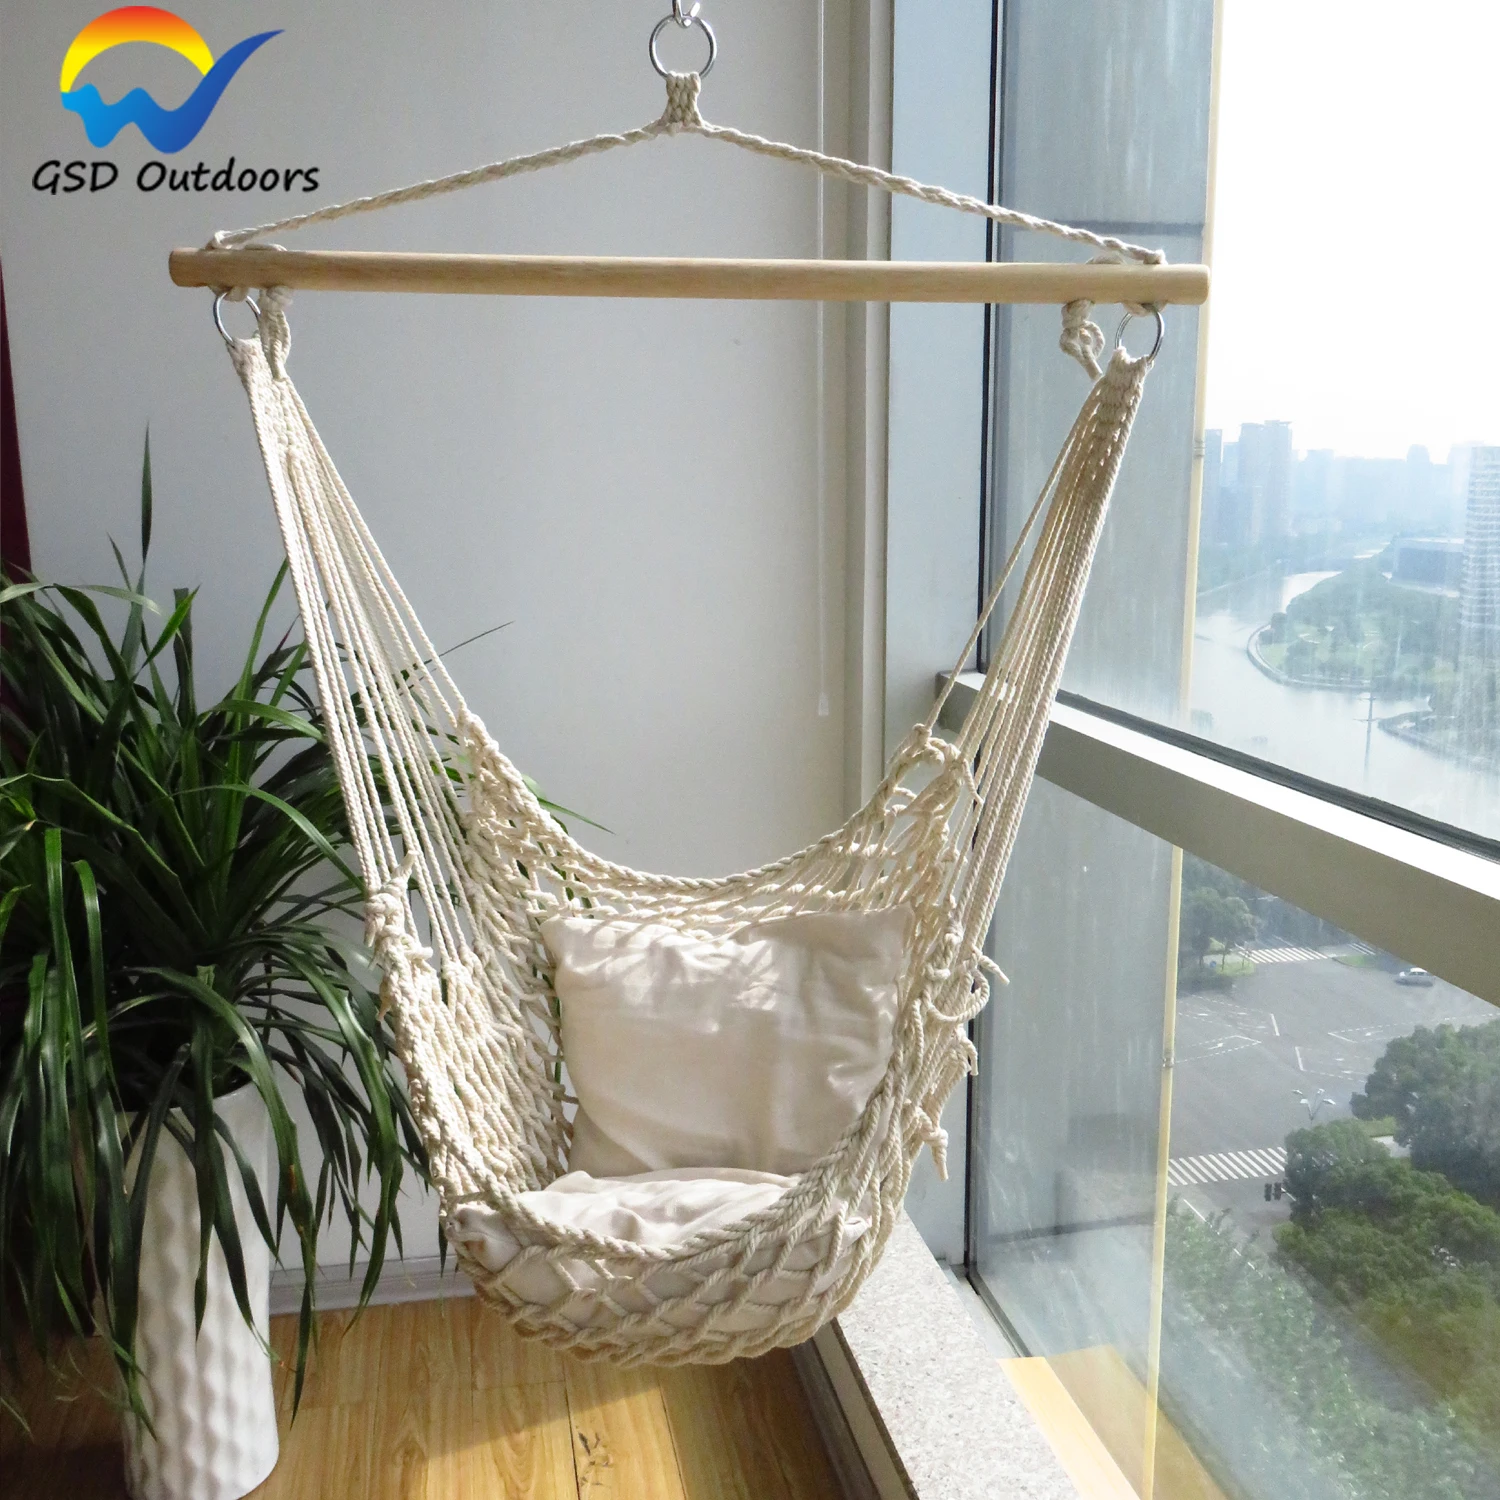 Chair Hammock Indoor Outdoor Use Rope Construction Cotton